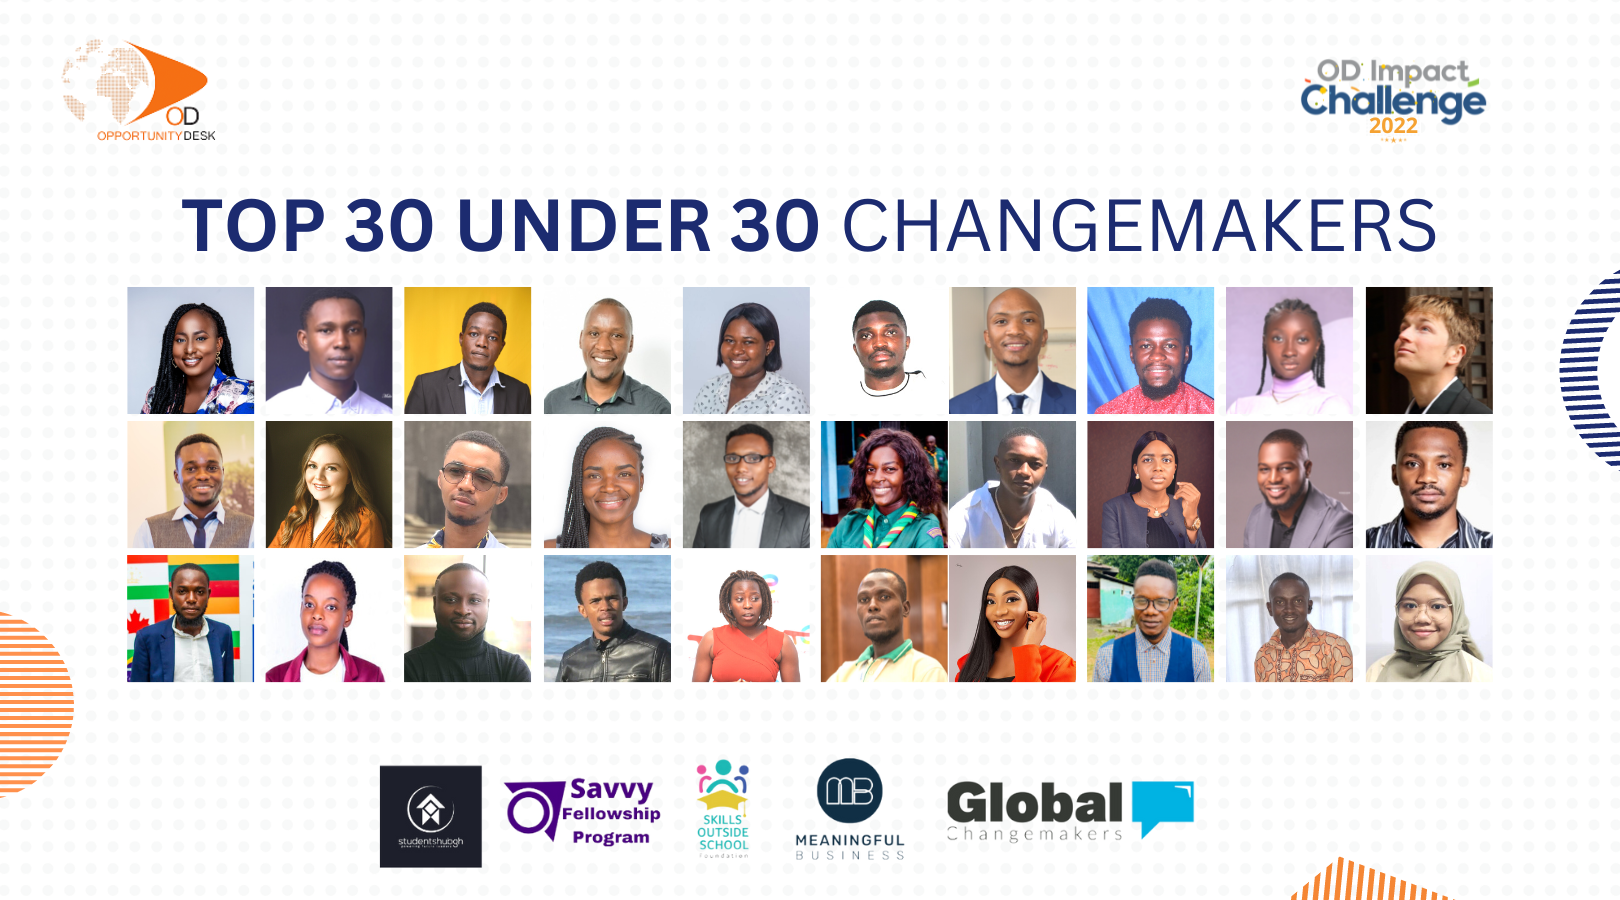 Announcing the 3rd Class of OD Impact Challenge 30 Under 30 Changemakers!